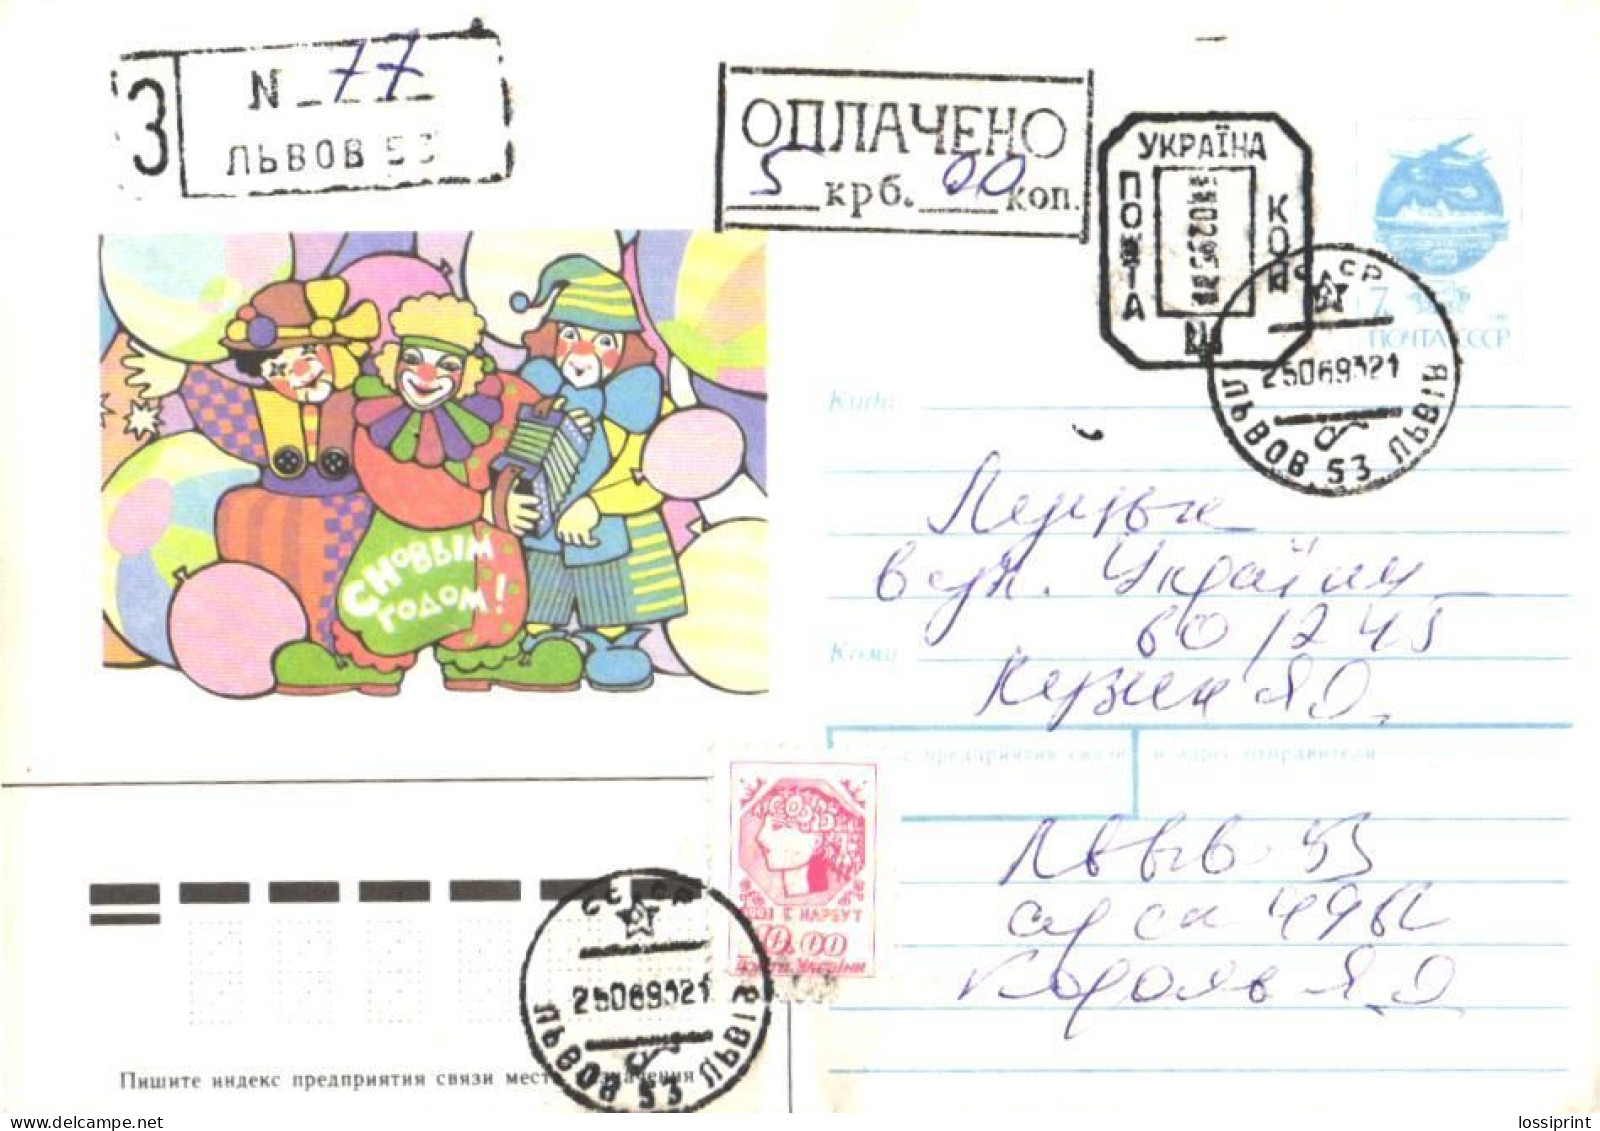 Ukraine:Ukraina:Registered Letter From Lvov 53 With Stamps And Surcharge Cancellation, 1993 - Ukraine